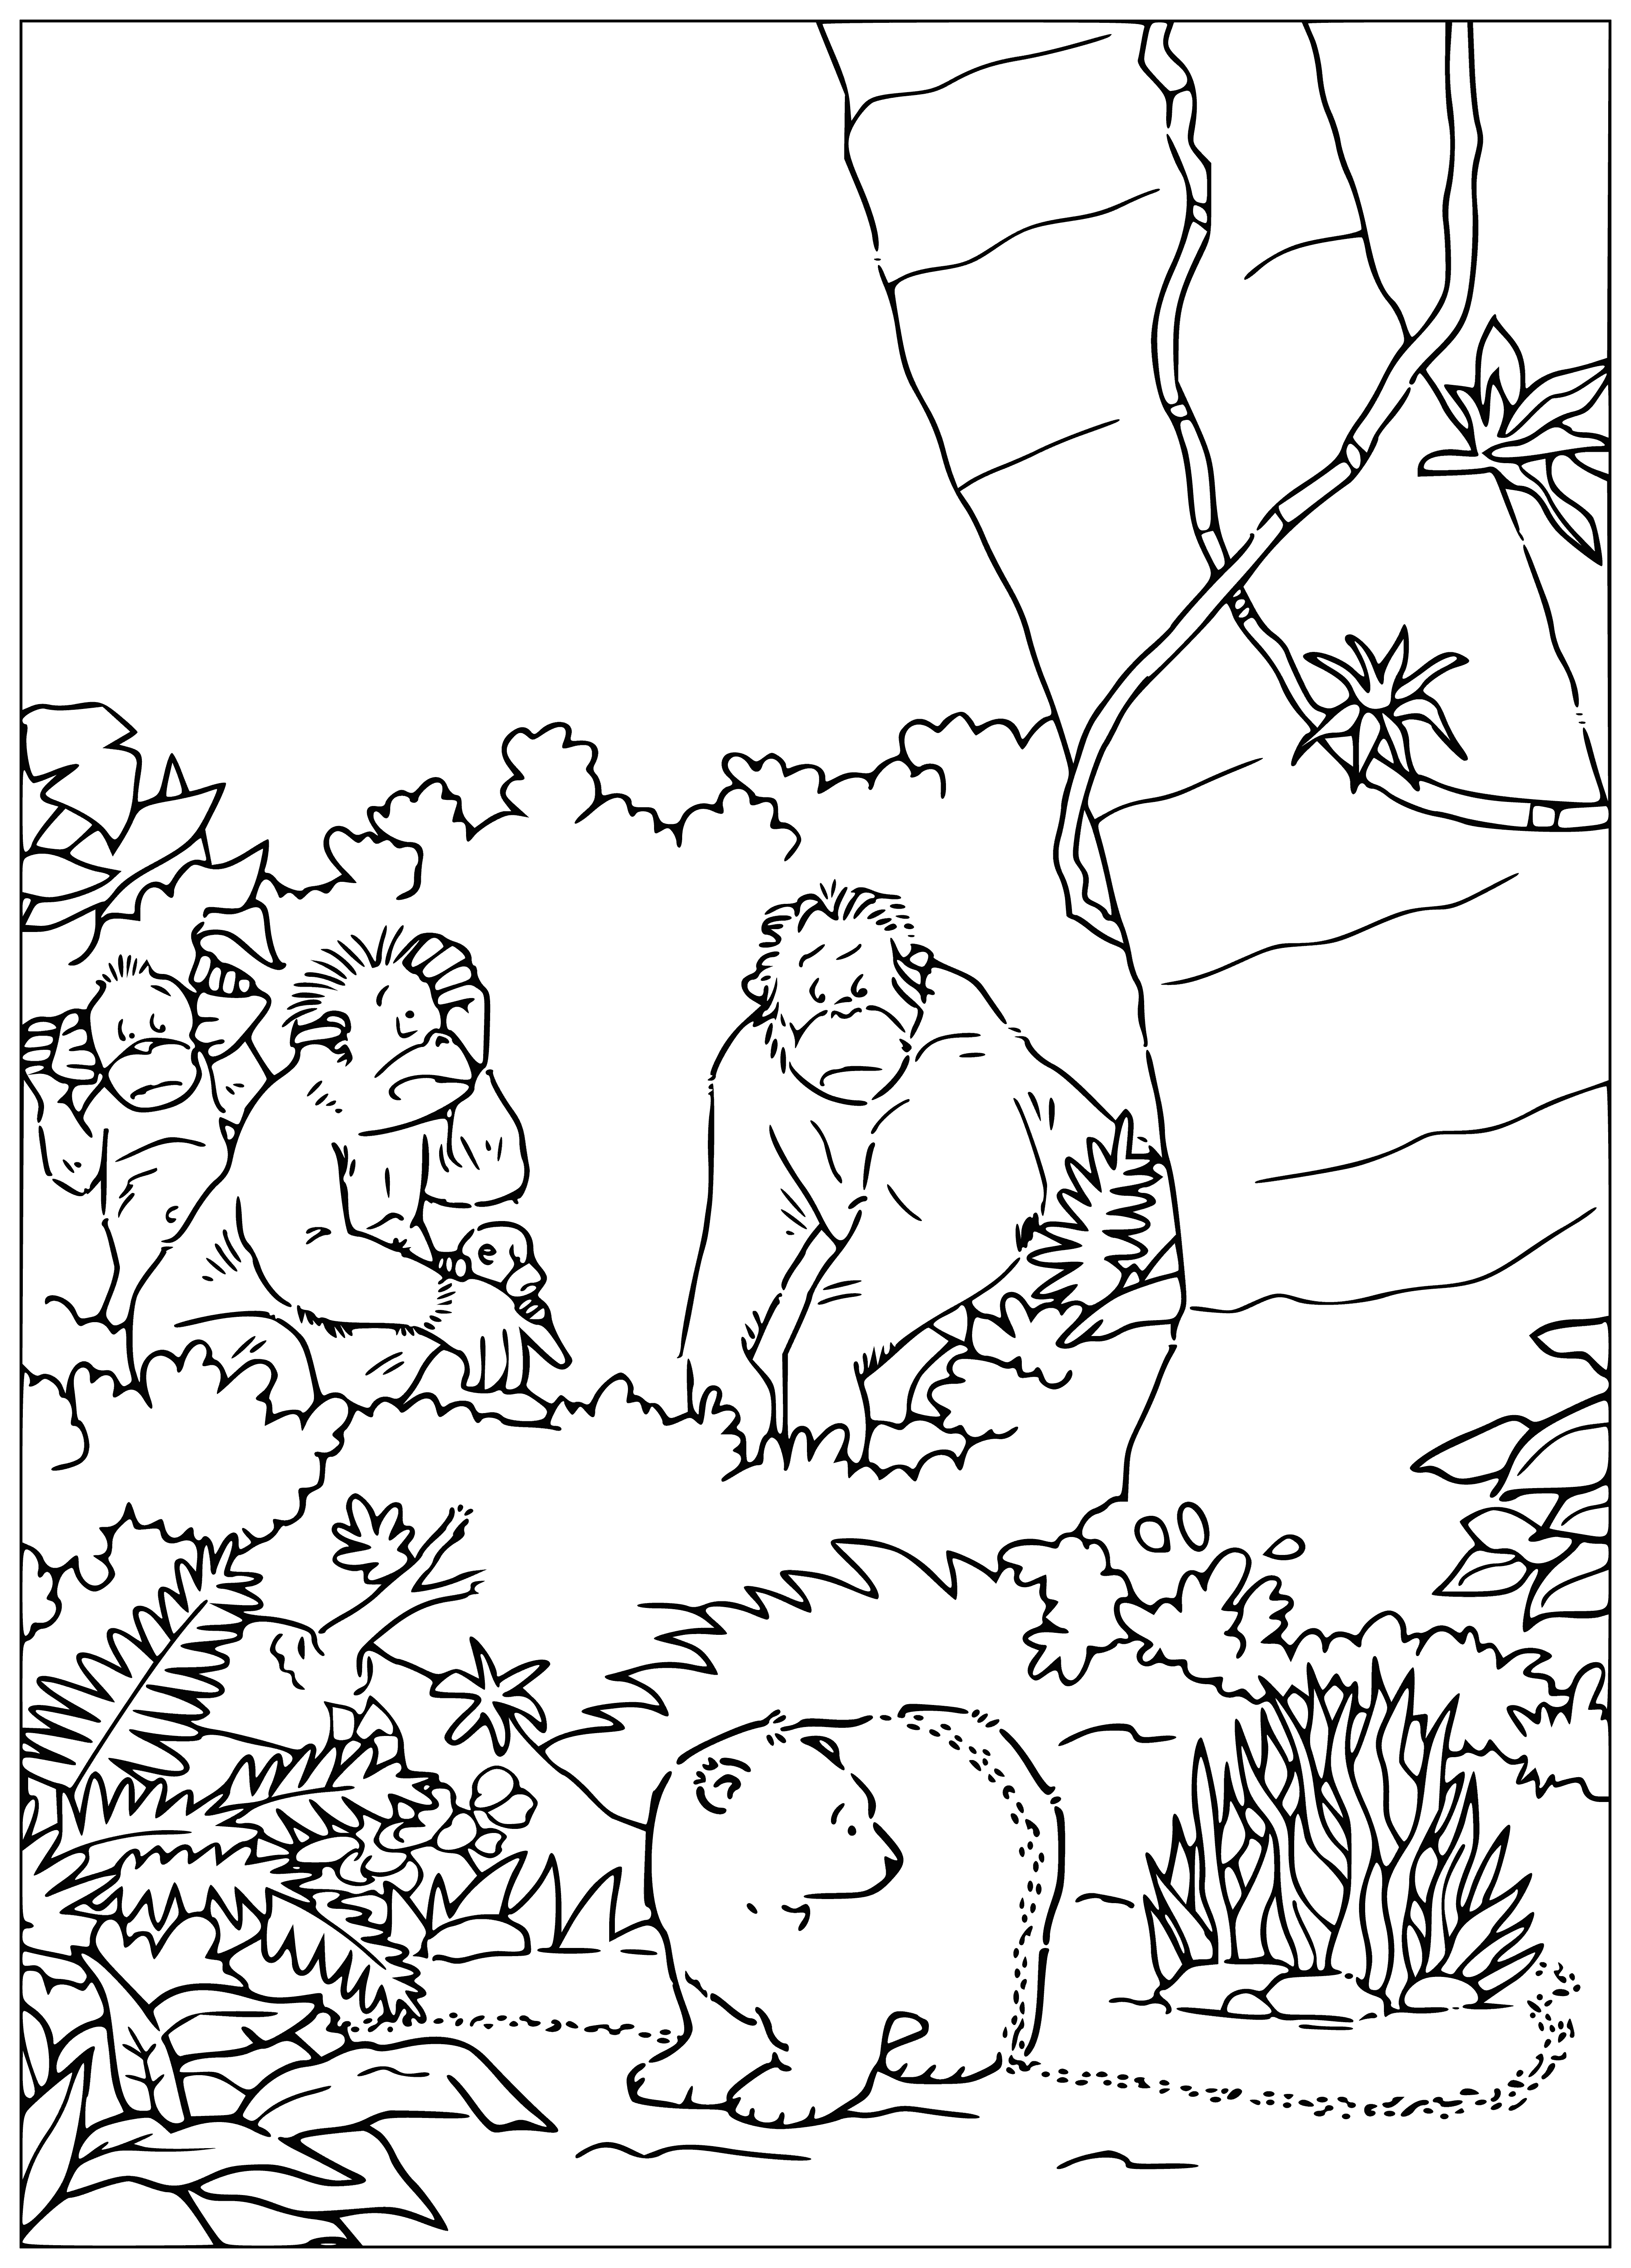 coloring page: 140 characters: Lars the polar bear plays with ants using a stick, causing them to scatter.